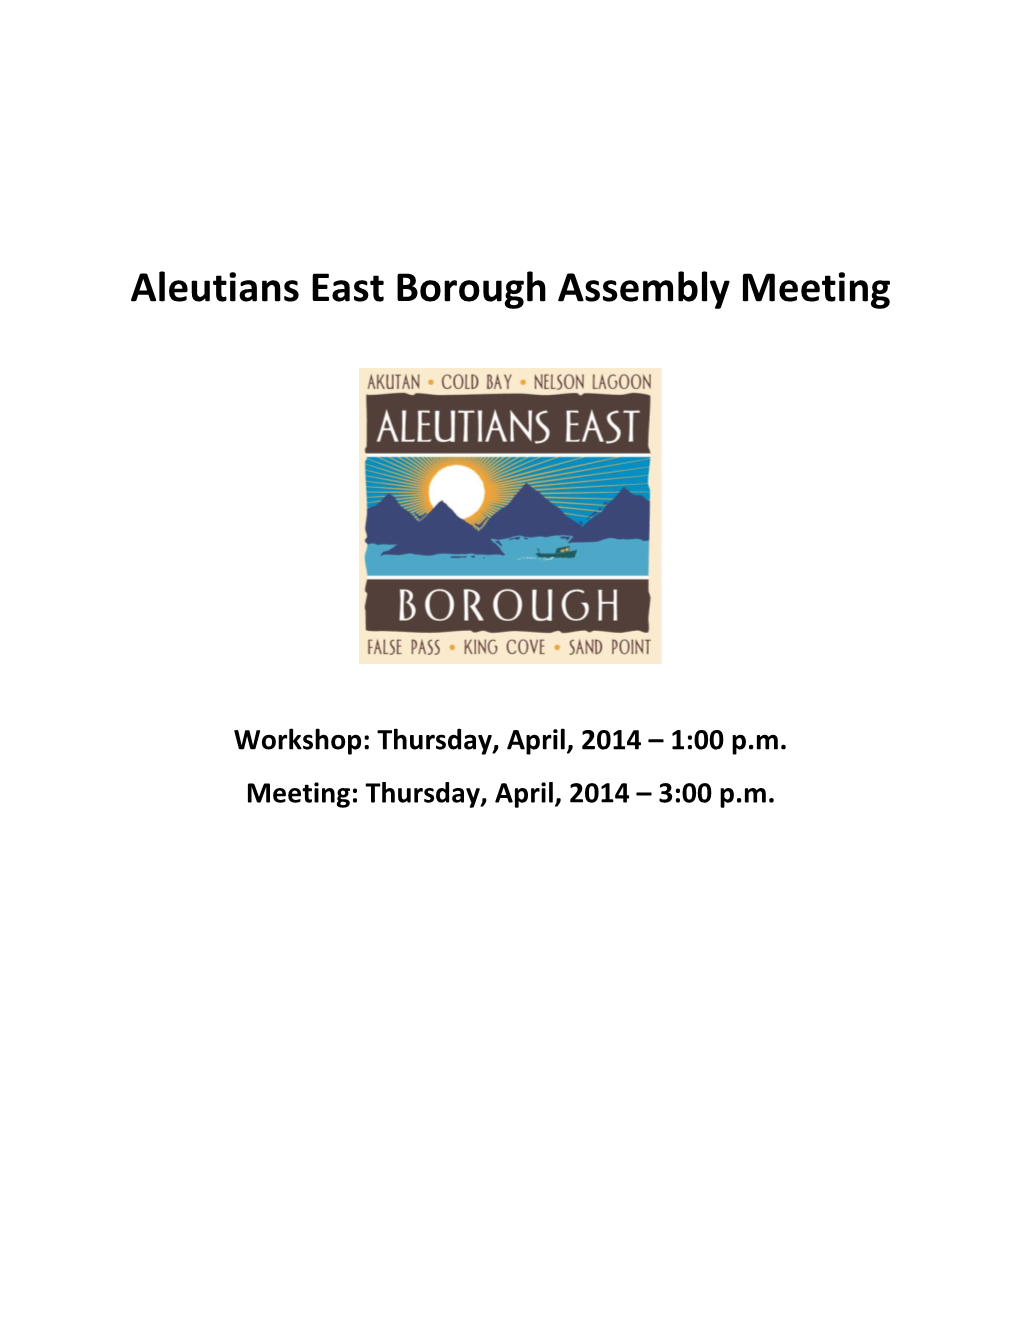 May 13, 2014 Assembly Meeting Packet